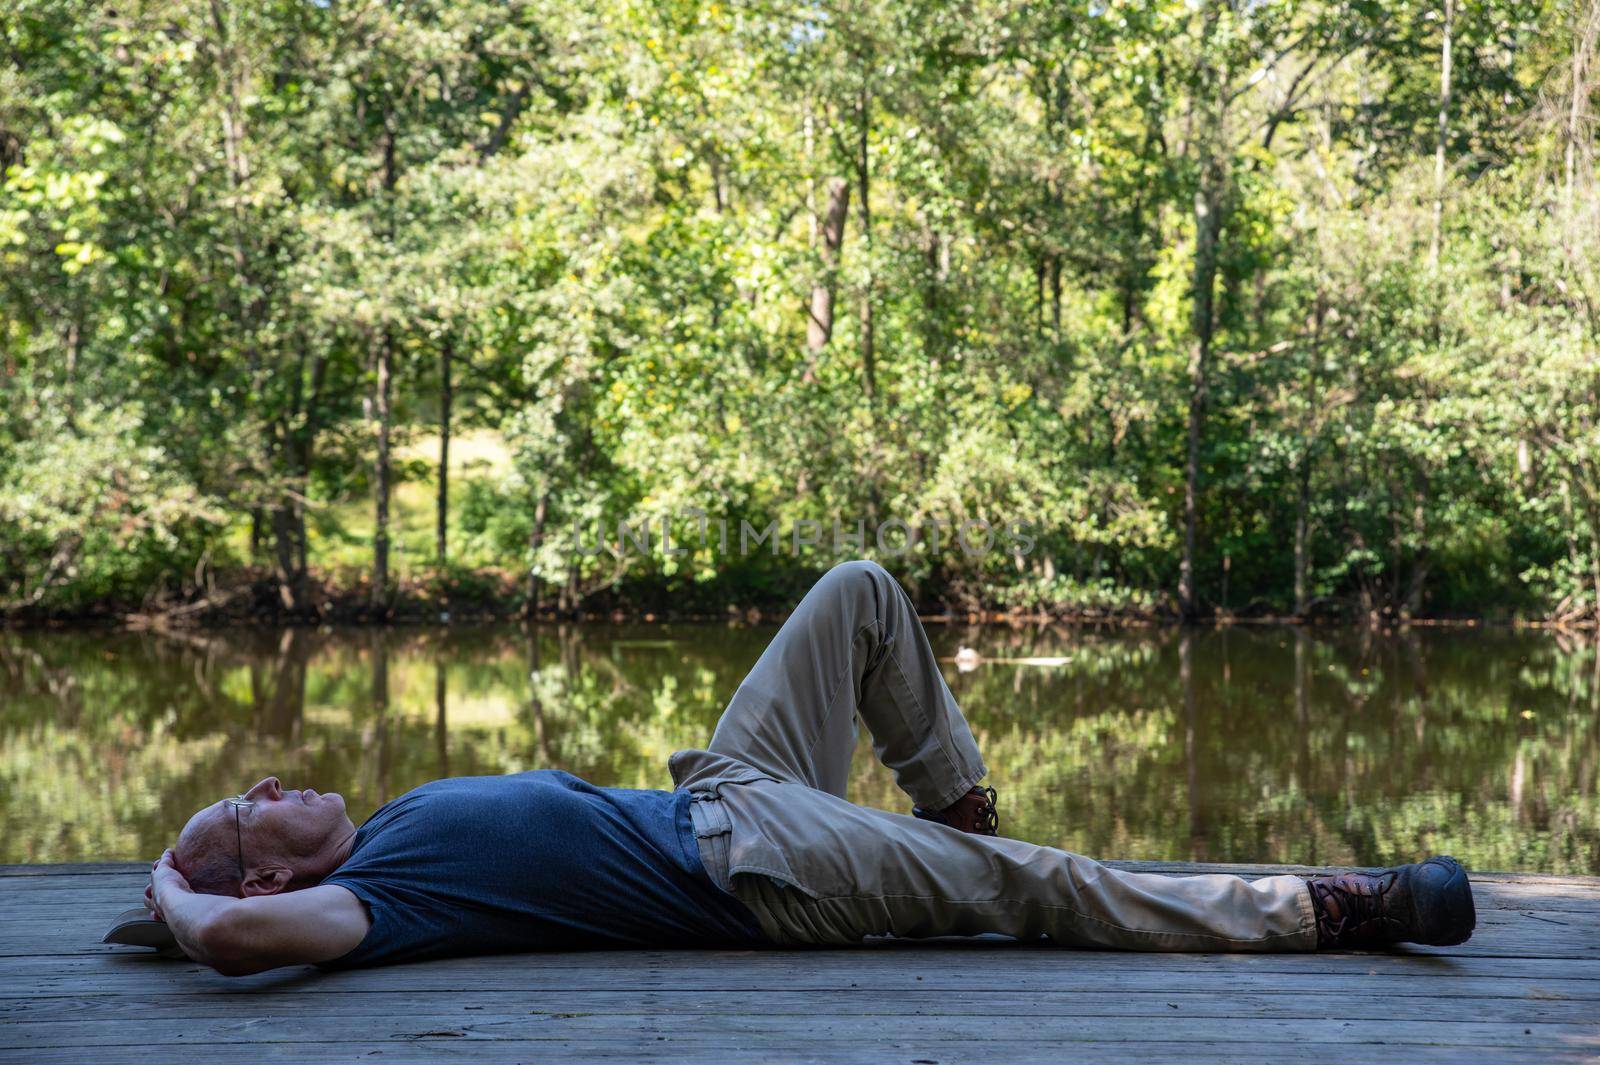 Caucasian man relaxes on a wooden dock by a tranquil woodland pond by marysalen